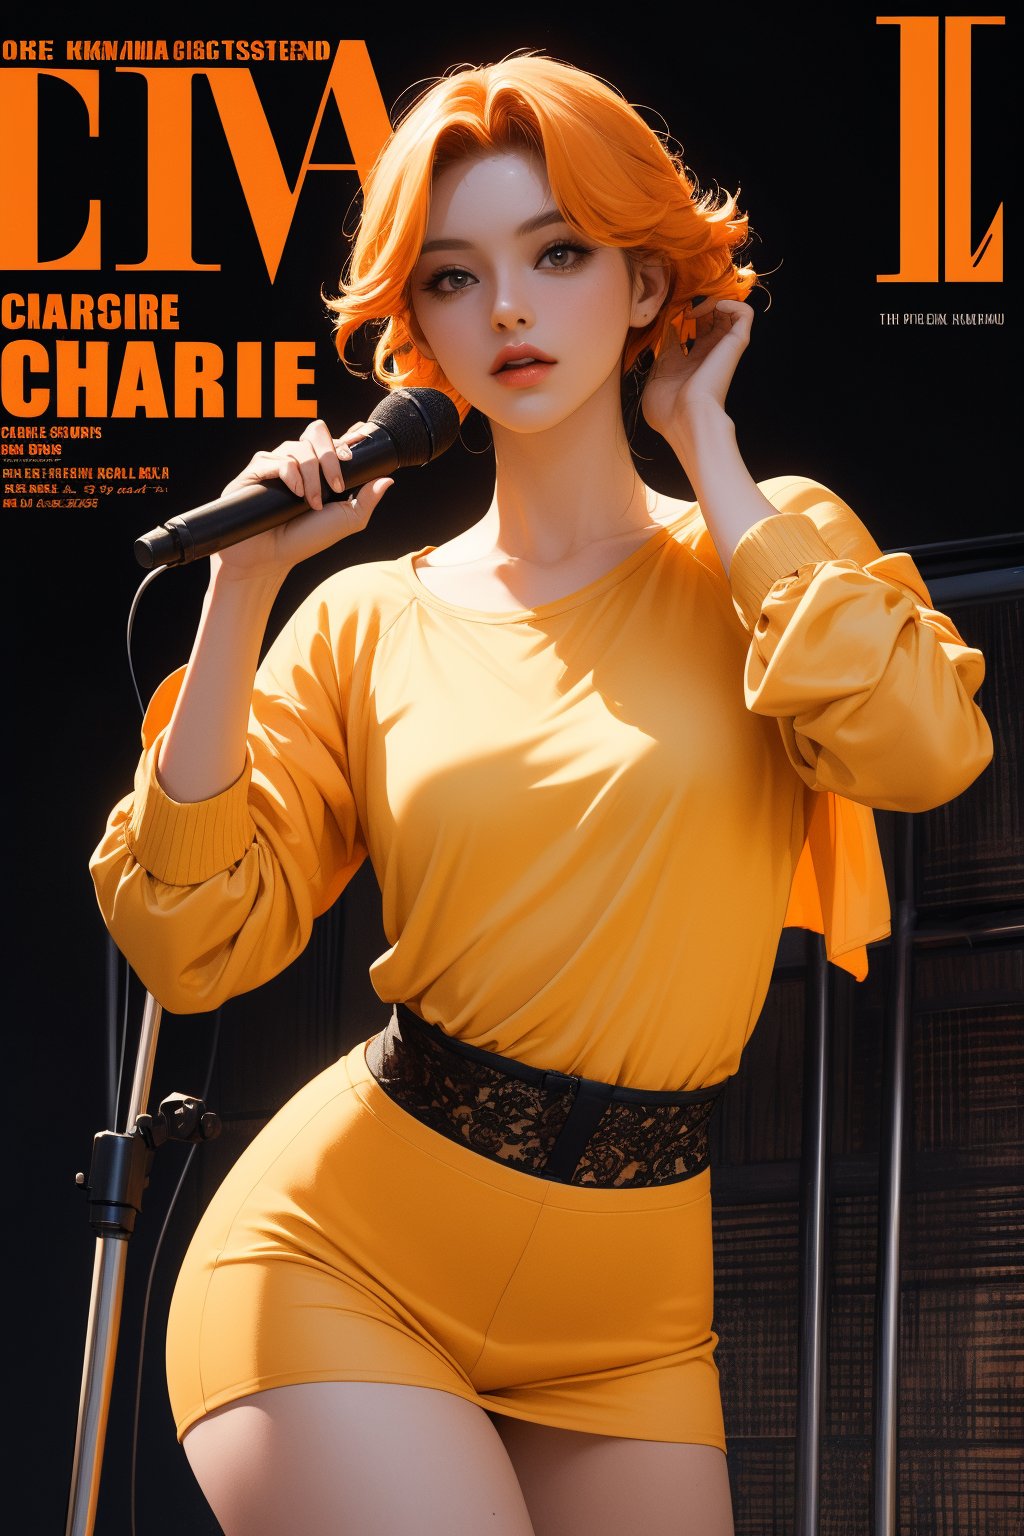 1girl, Charlie Kyrn, looking at viewer, thigh up body, rockstar idol, styled outfit, on stage, professional lighting, red-yellow-orange hair, different hairstyle, coloful, magazine cover, best quality, masterpiece,johyun,kmiu,Charlie Kyrn